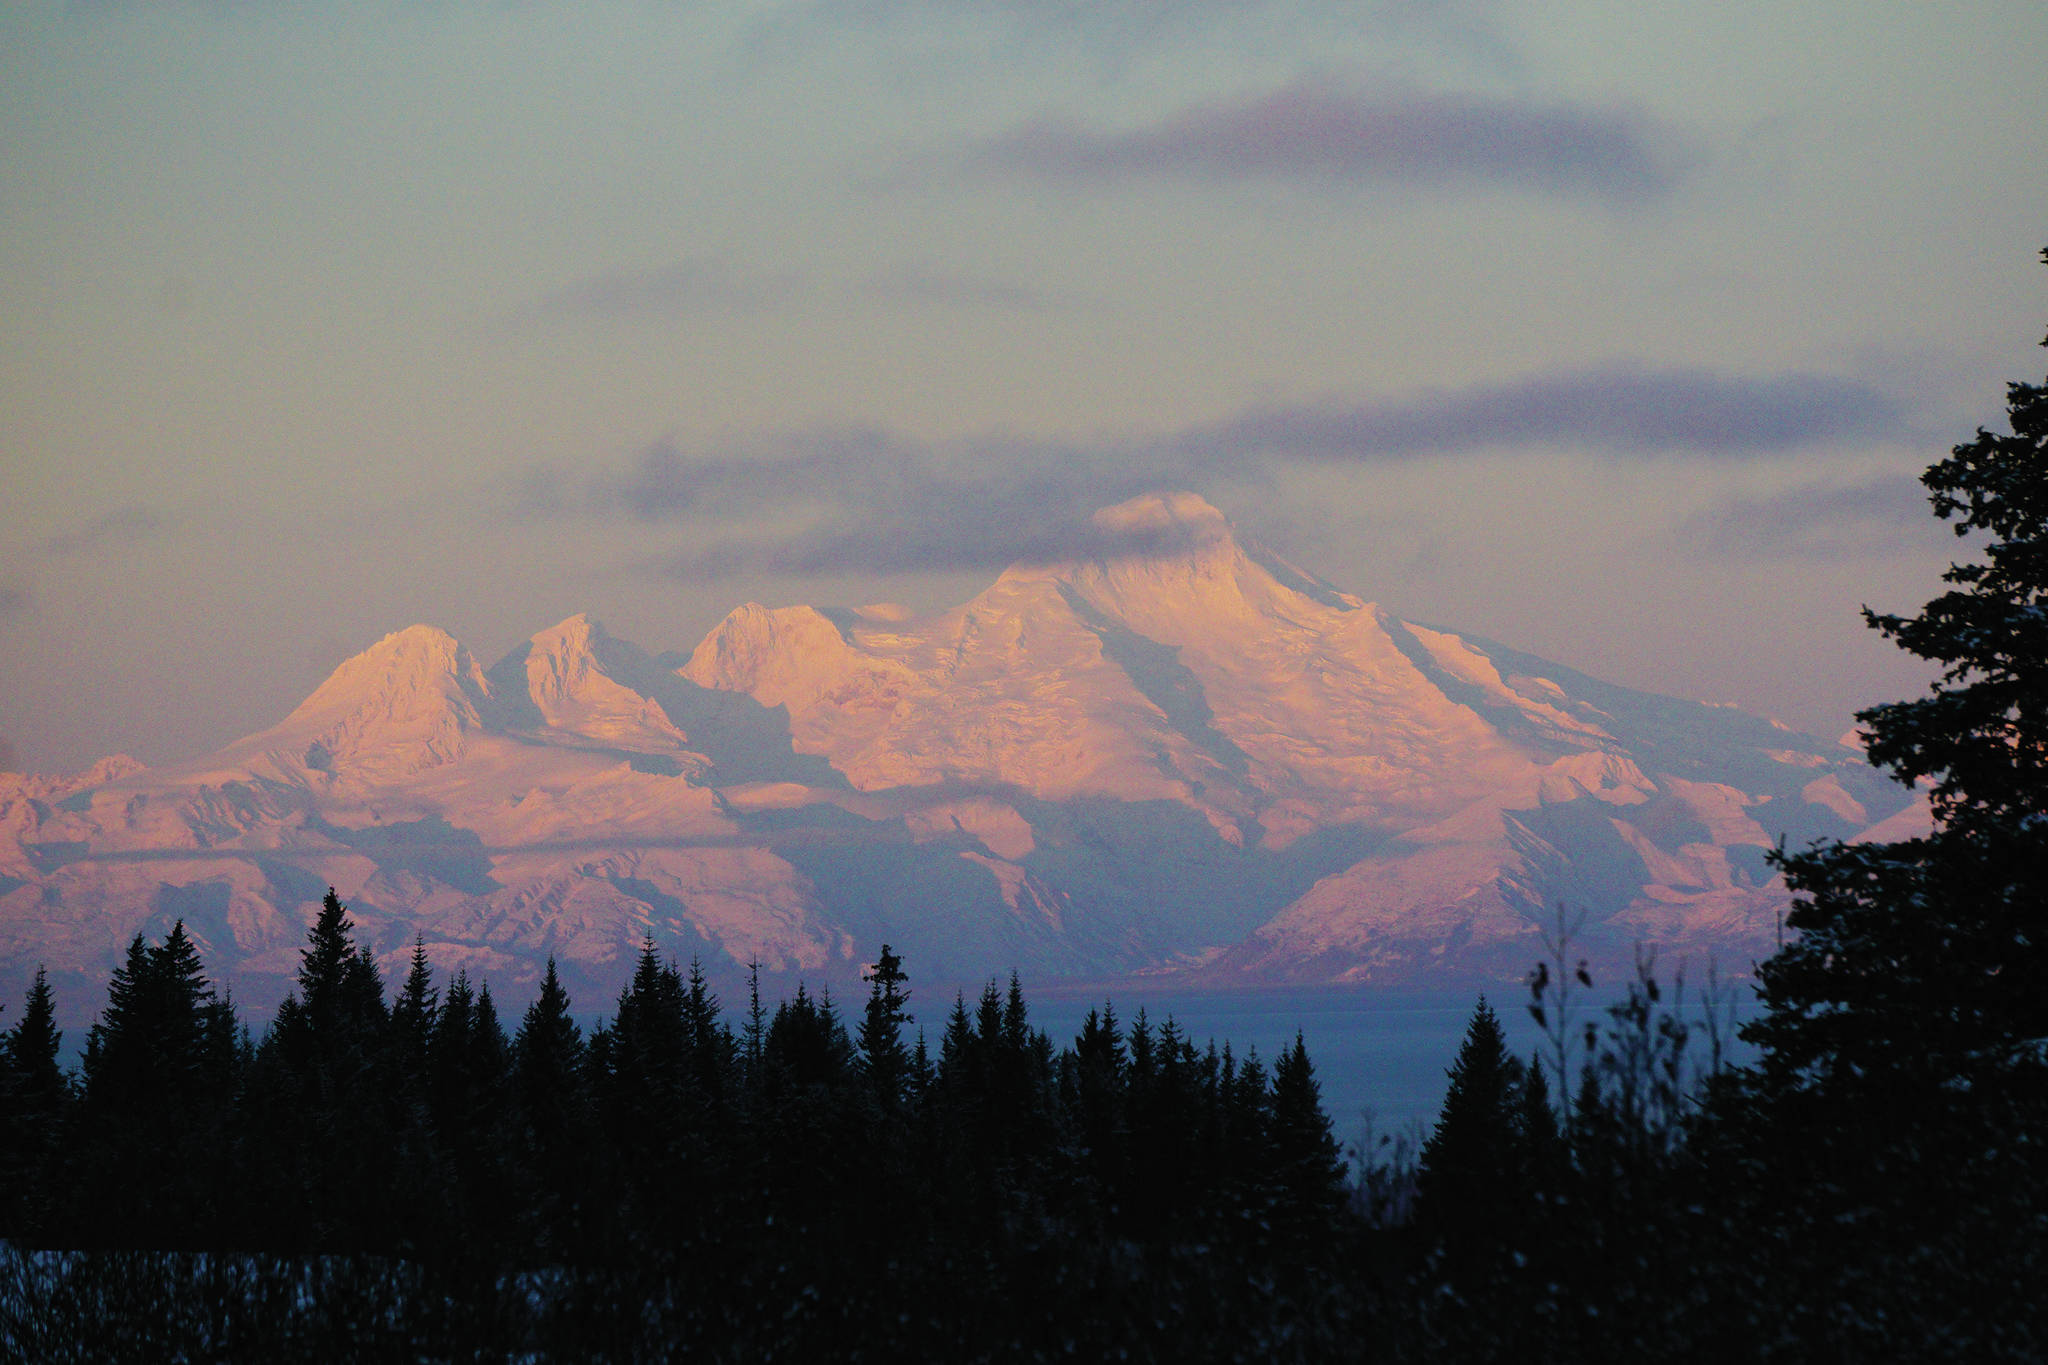 Mount Iliamna glows pink as the sun rises on Wednesday morning, Dec. 16, 2020, as seen from Diamond Ridge near Homer, Alaska. Iliamna is one of three Cook Inlet volcanoes visible from Homer. (Photo by Michael Armstrong/Homer News)